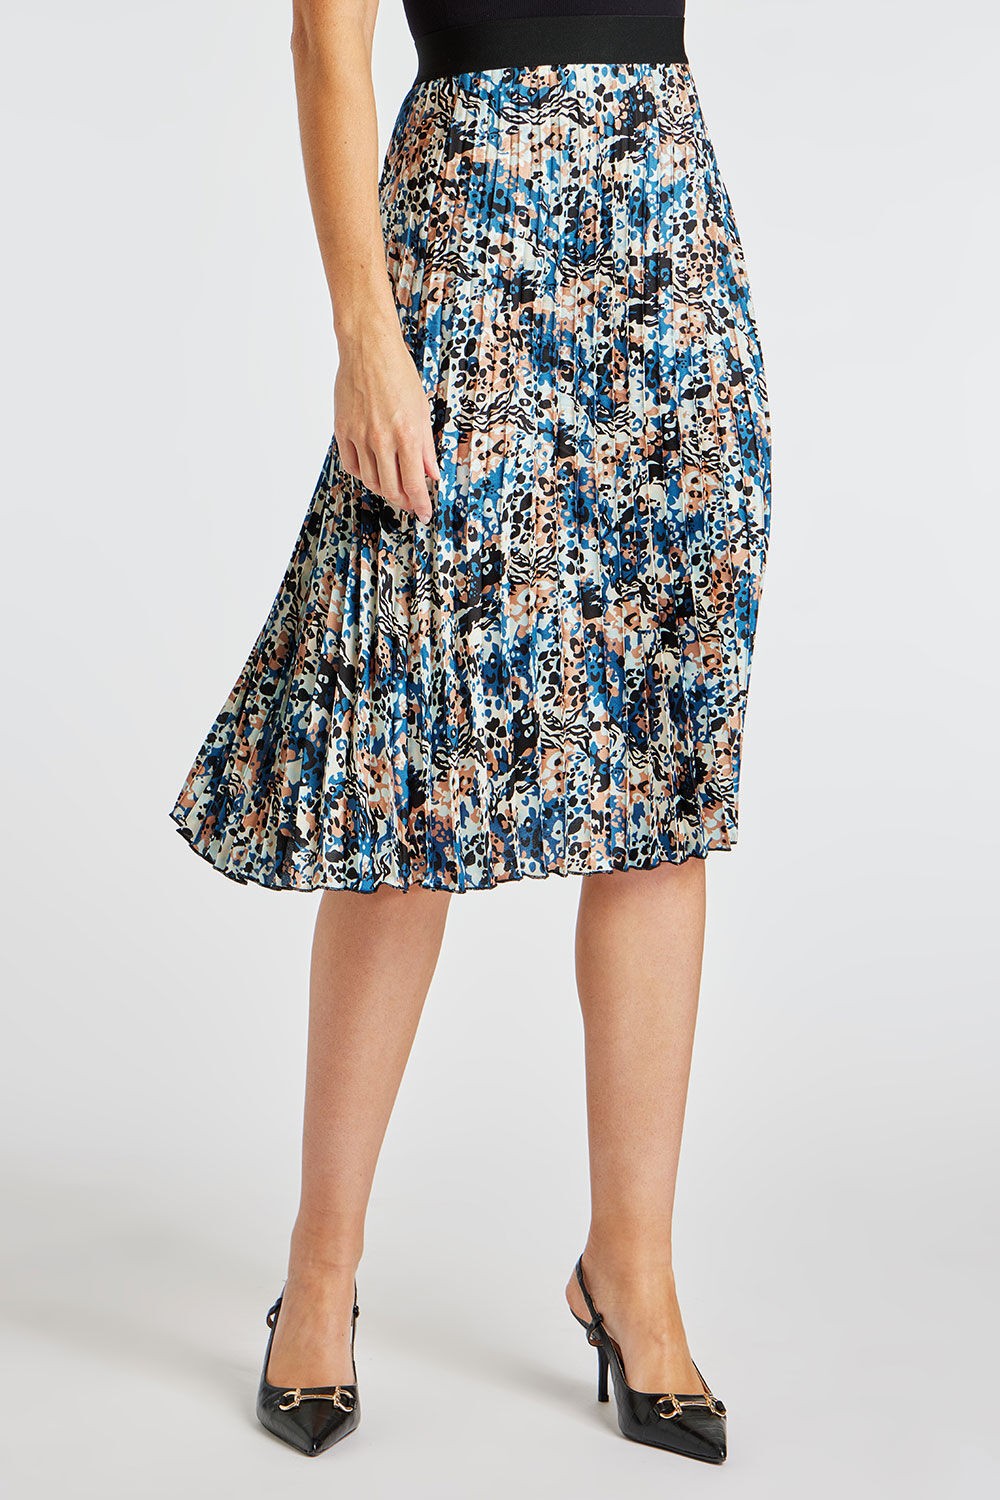 Bonmarche Brown Animal Patchwork Print Elasticated Pleated Skirt, Size: 10